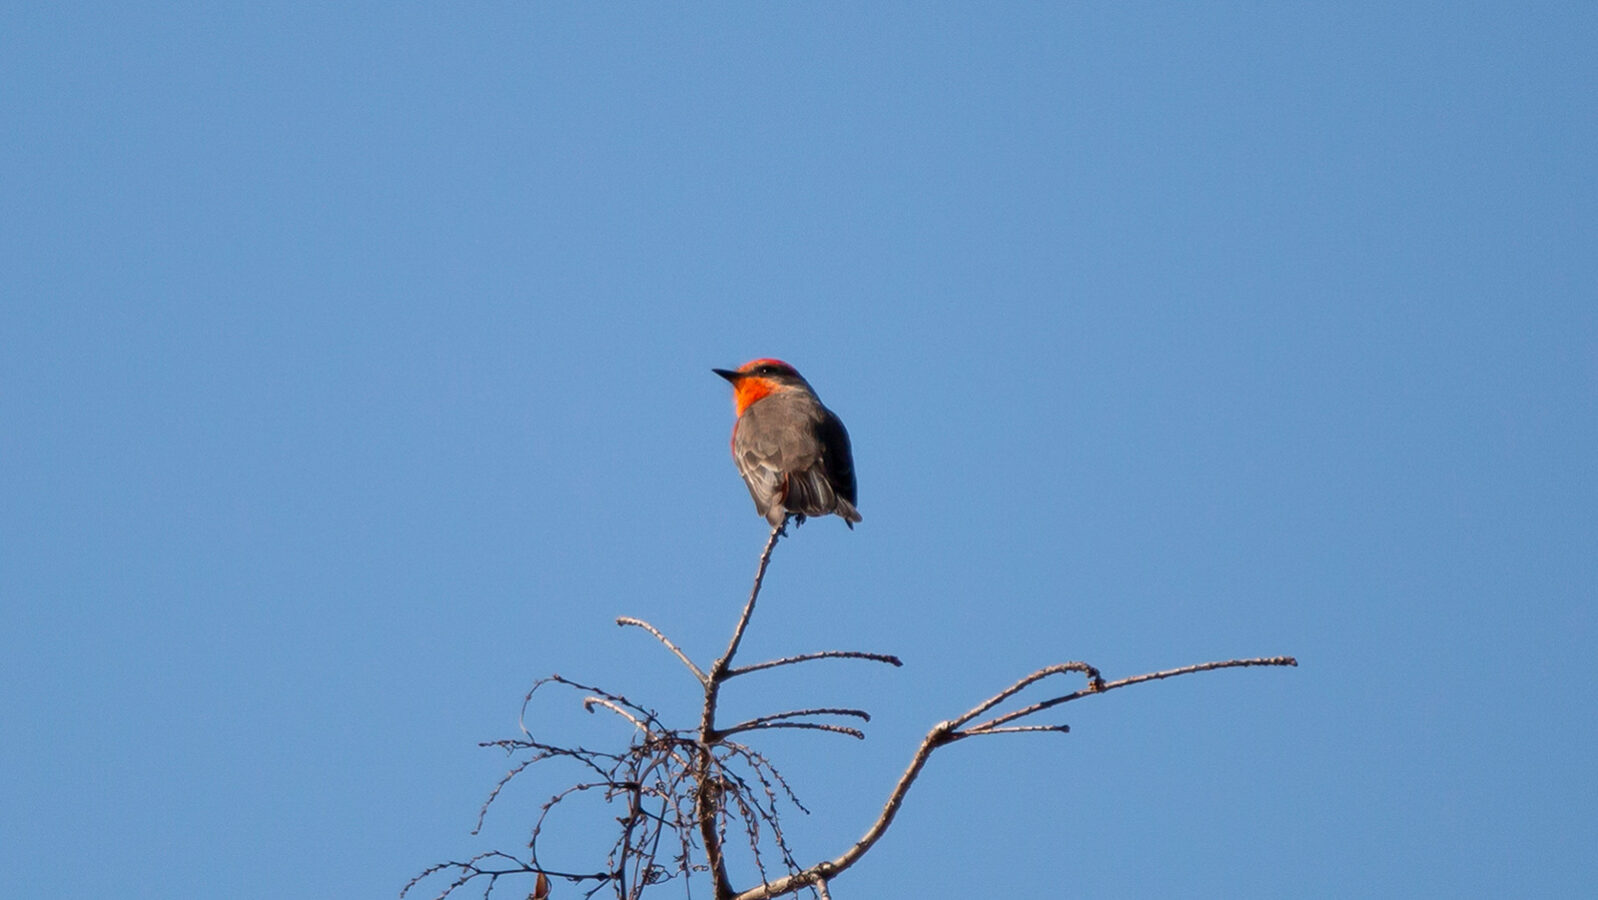 Vermillion flycatcher perched on top of a bare tree